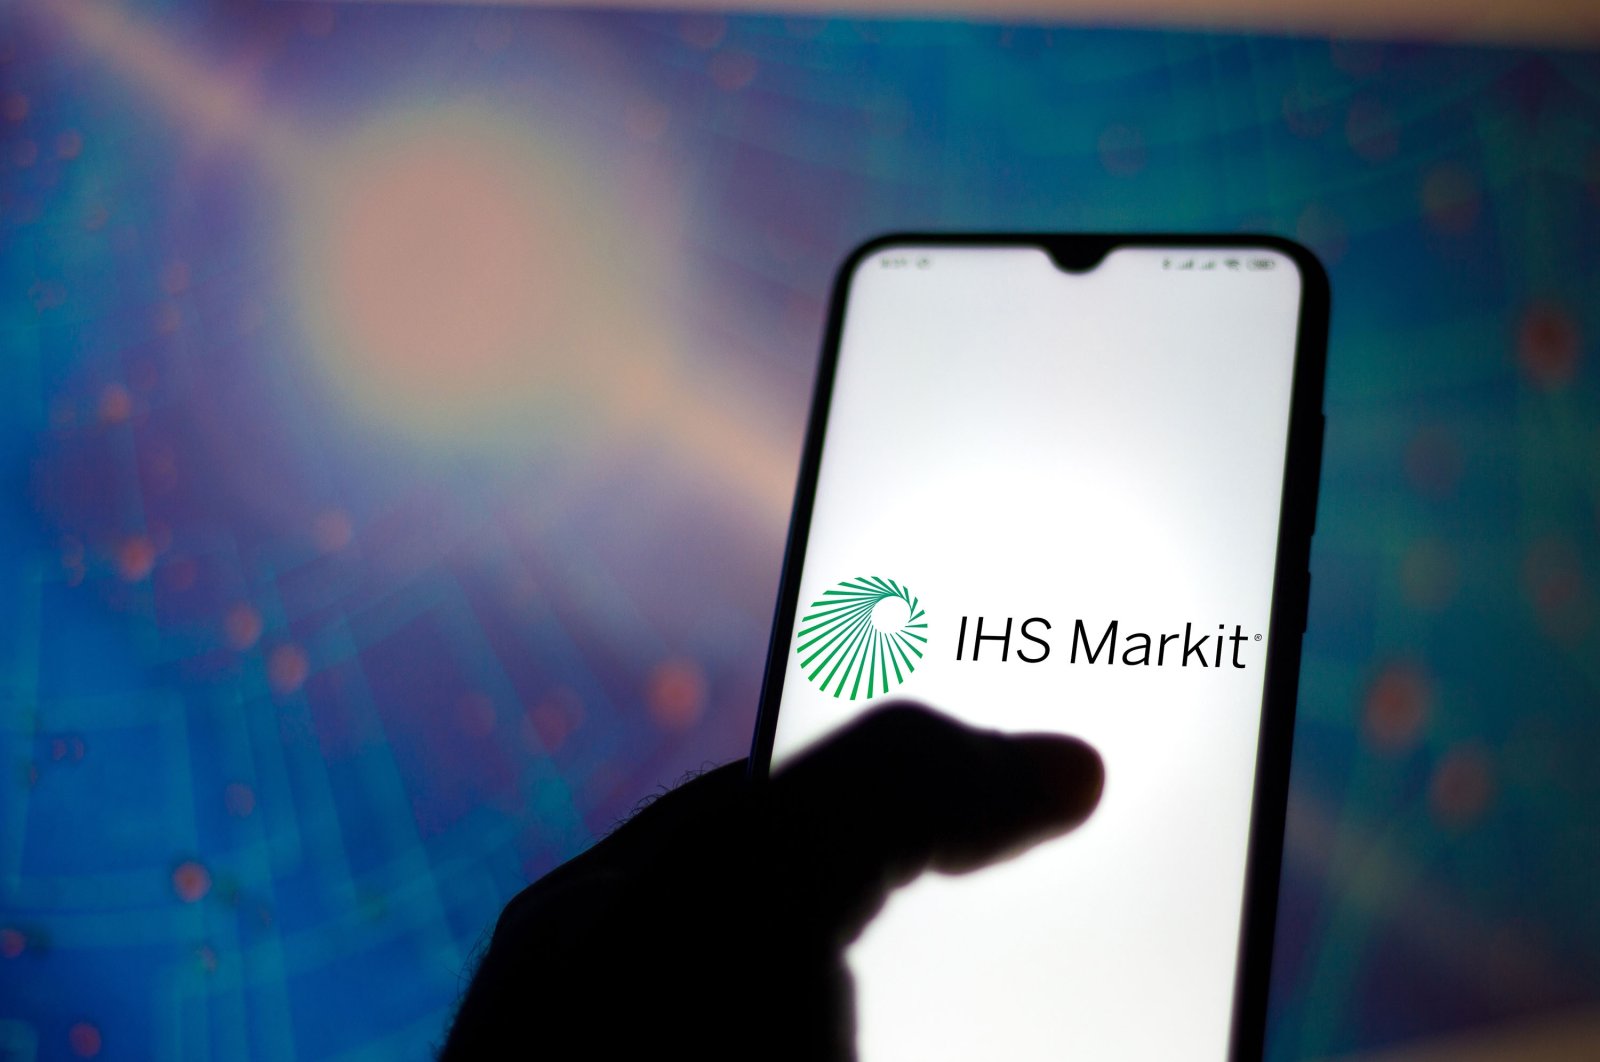 In this photo illustration, the IHS Markit logo is displayed on a smartphone, Brazil, June 16, 2020. (Shutterstock Photo)